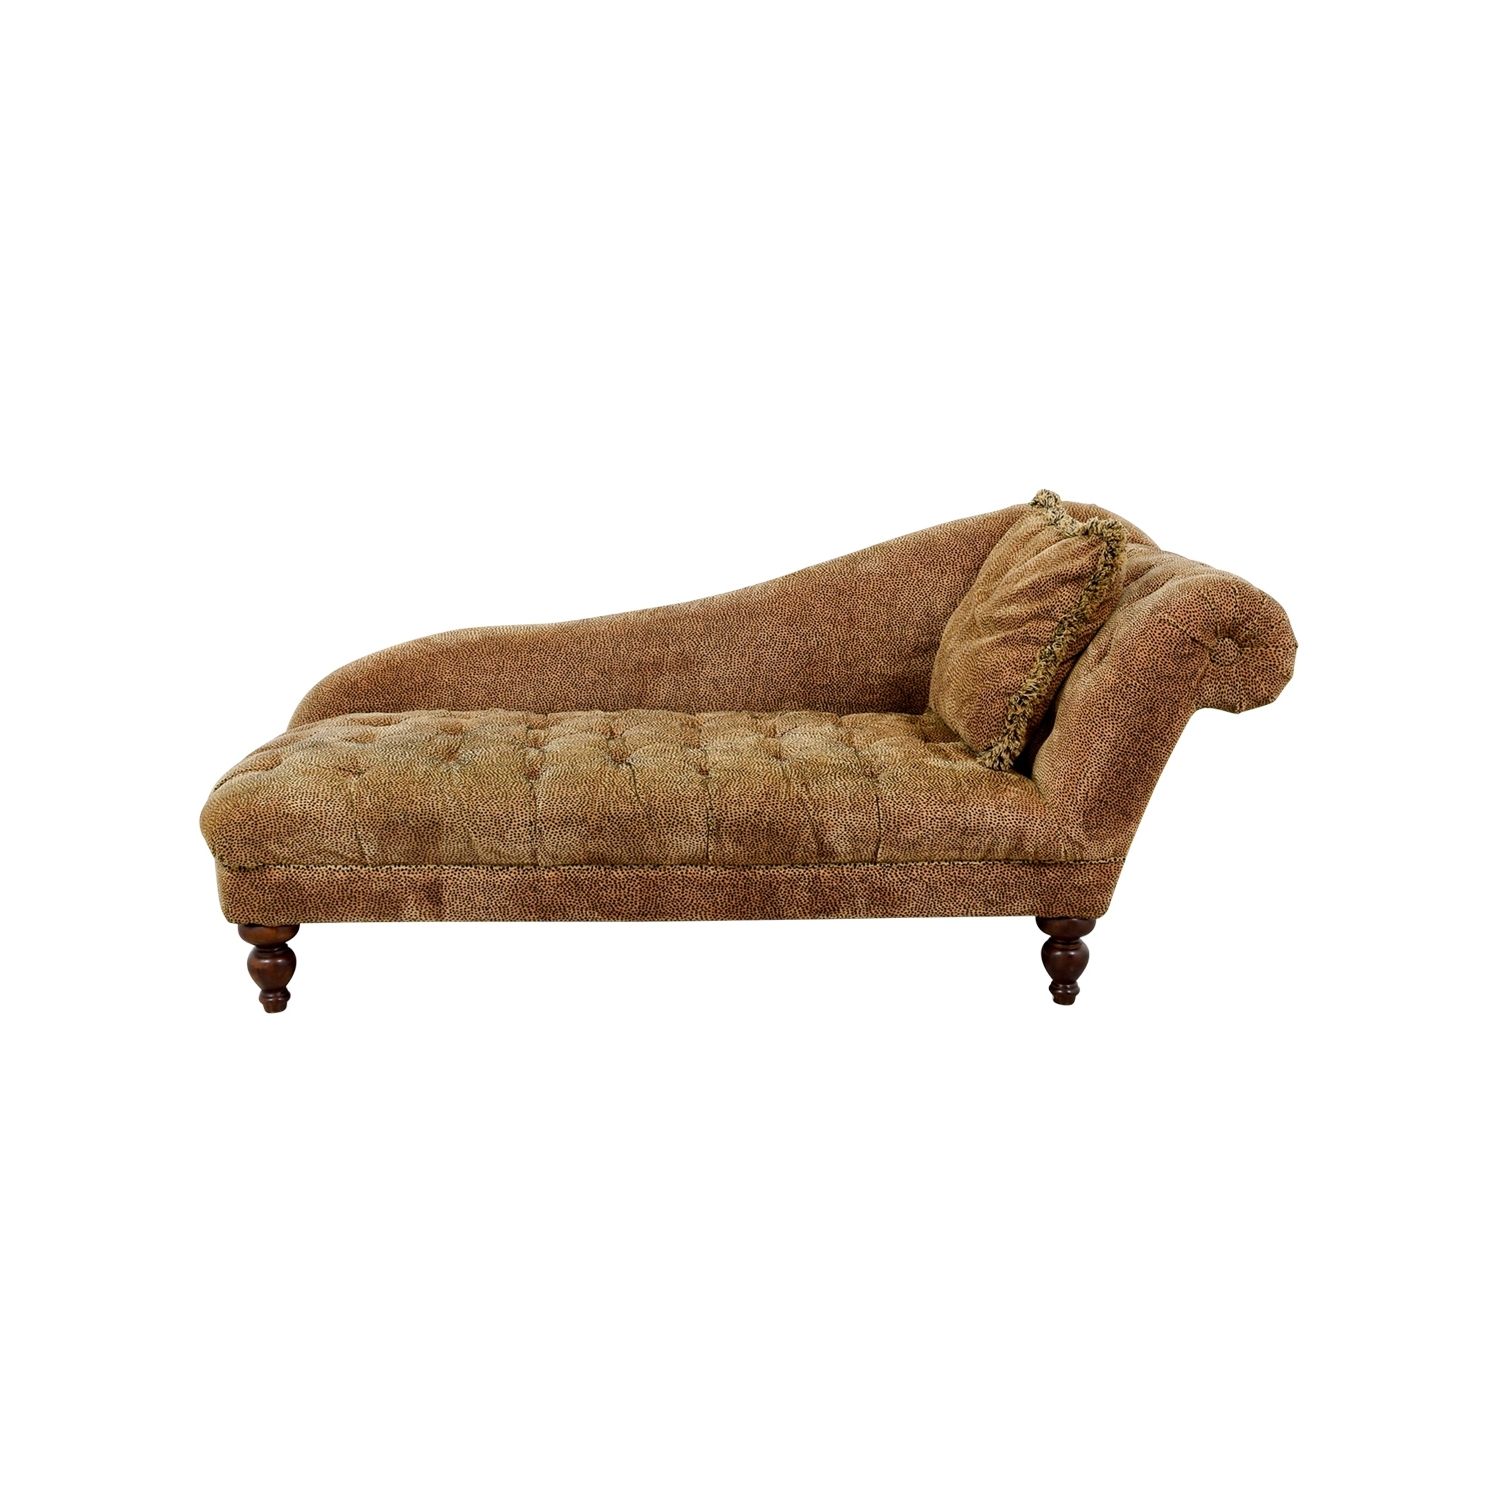 [%73% Off – Domain Home Furnishings Domain Home Furnishings Leopard Within Most Up To Date Leopard Chaises|leopard Chaises Intended For Most Current 73% Off – Domain Home Furnishings Domain Home Furnishings Leopard|famous Leopard Chaises Intended For 73% Off – Domain Home Furnishings Domain Home Furnishings Leopard|2017 73% Off – Domain Home Furnishings Domain Home Furnishings Leopard Intended For Leopard Chaises%] (Photo 1 of 15)